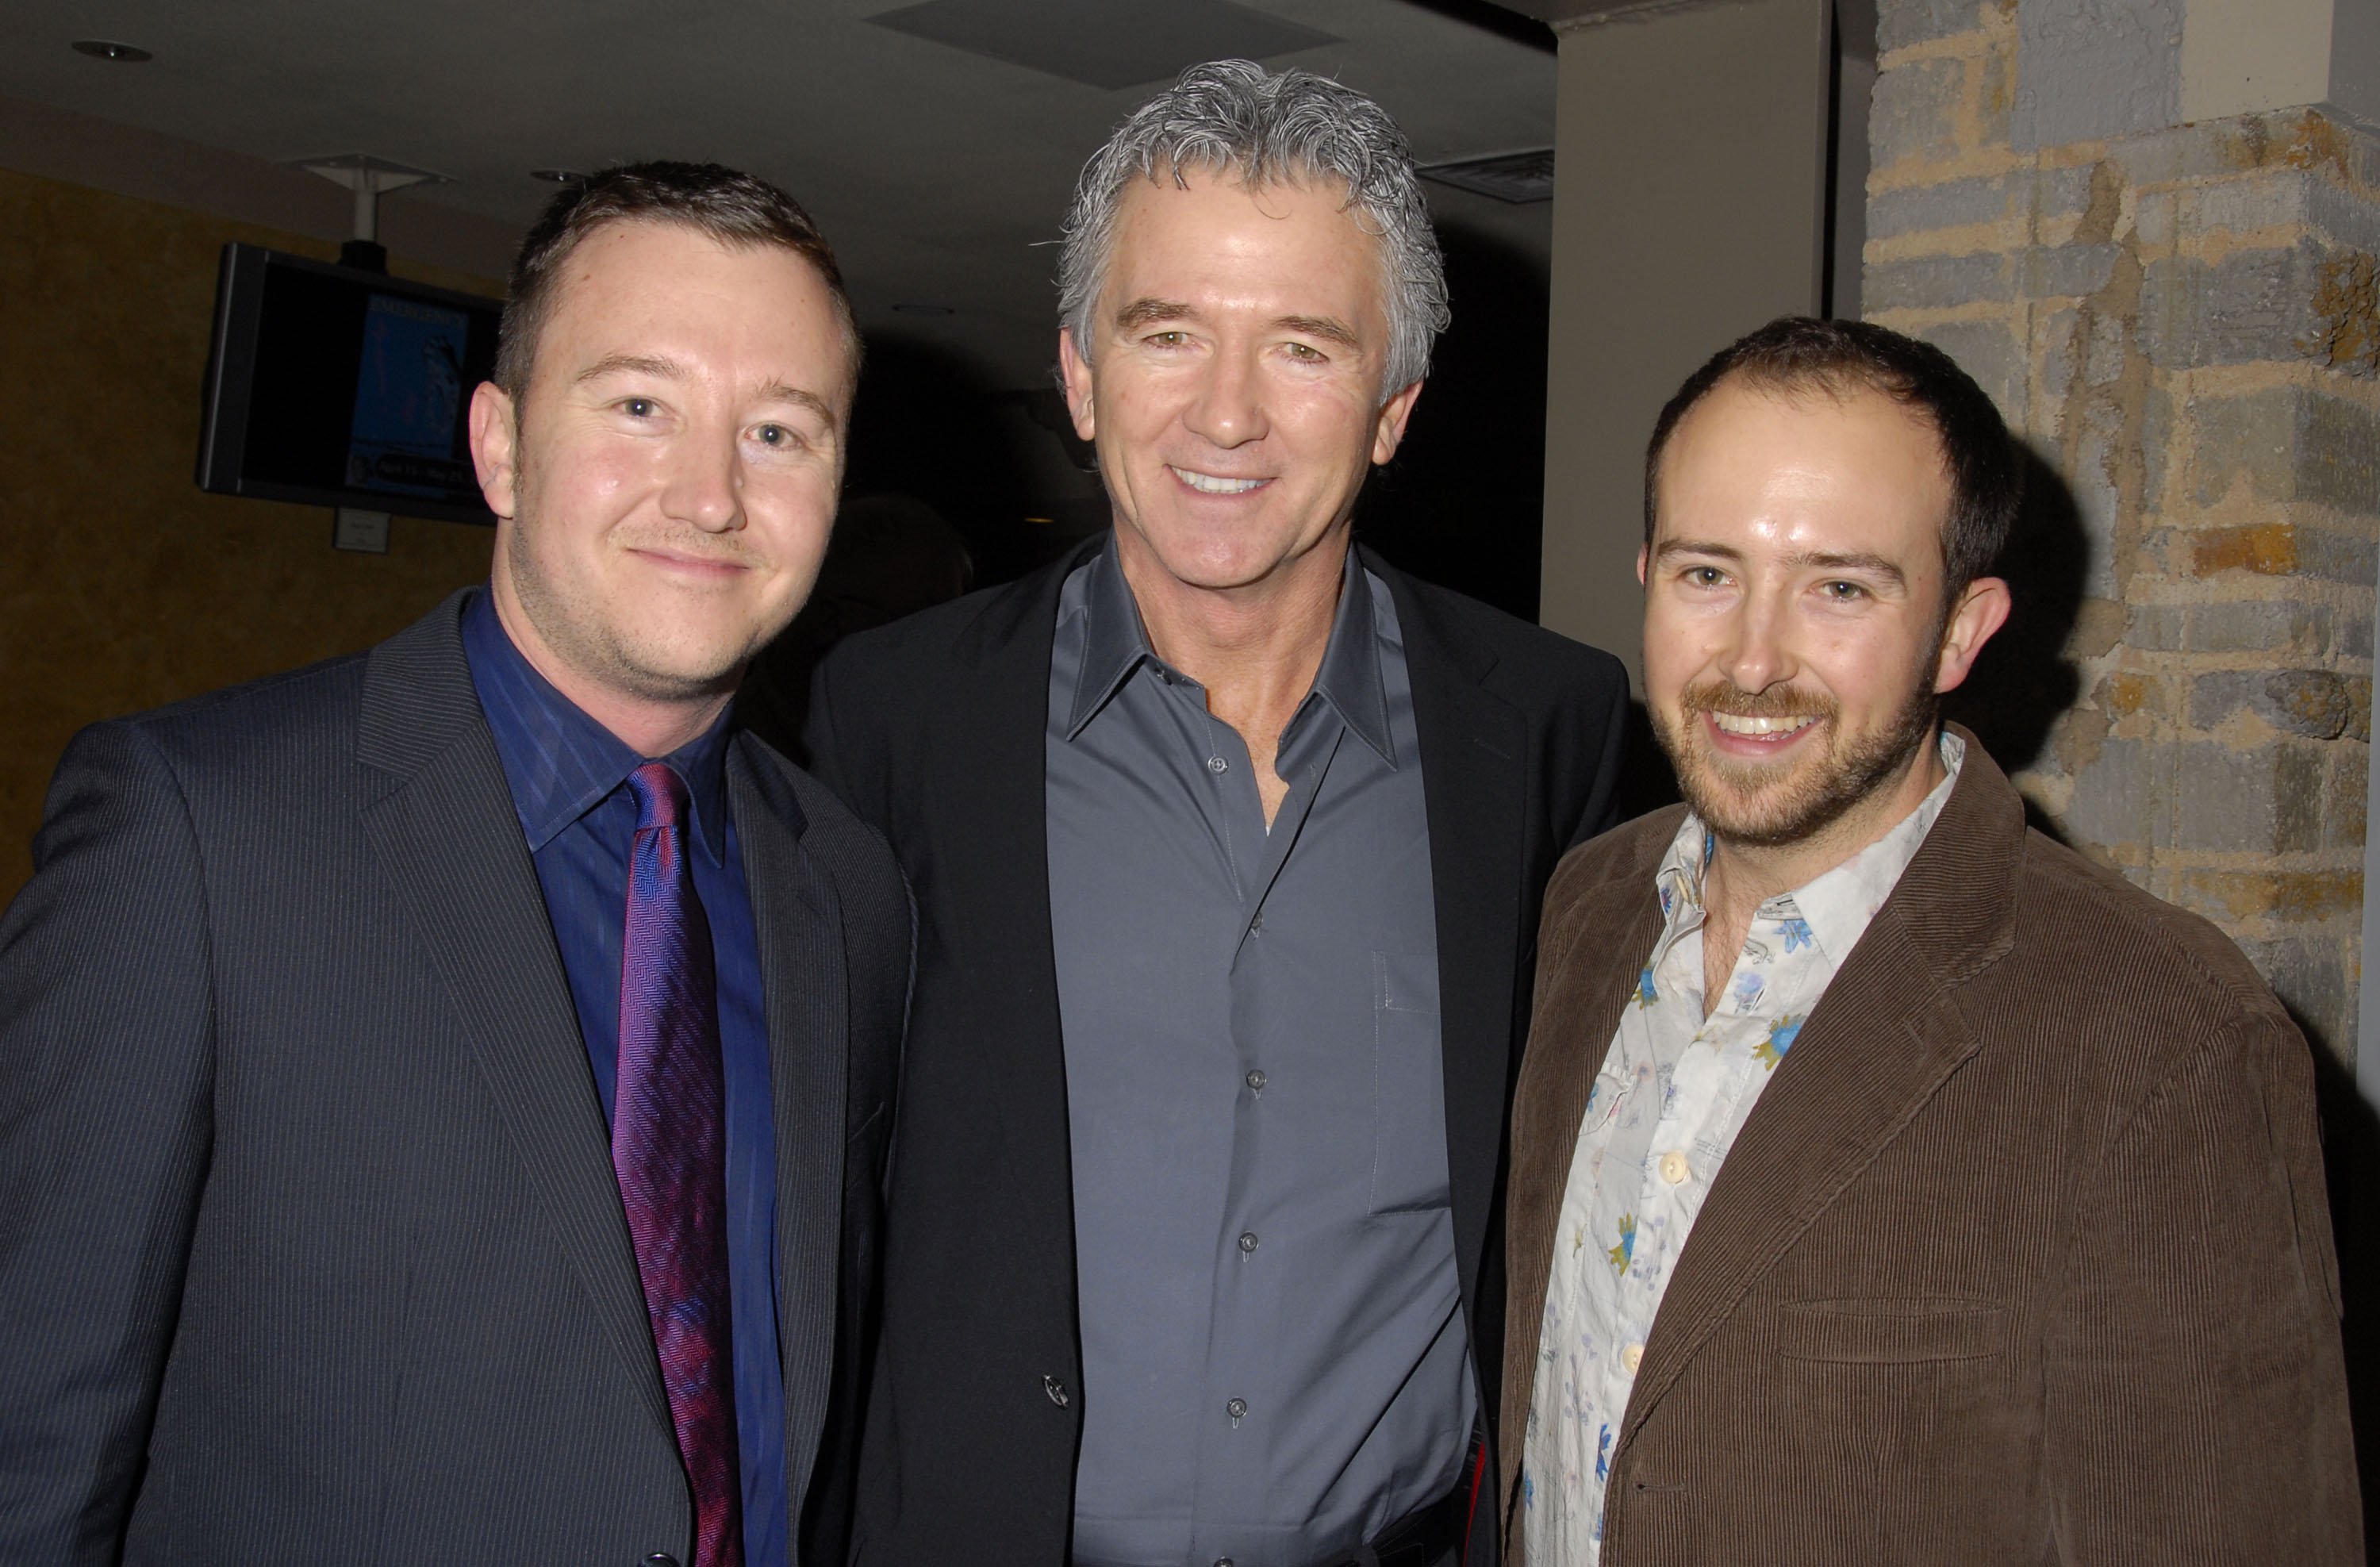 Padriac, Patrick, and Conor Duffy at the opening night of Joan Rivers: A Work in Progress By A Life in Progress on February 13, 2008, in Los Angeles, California | Source: Getty Images